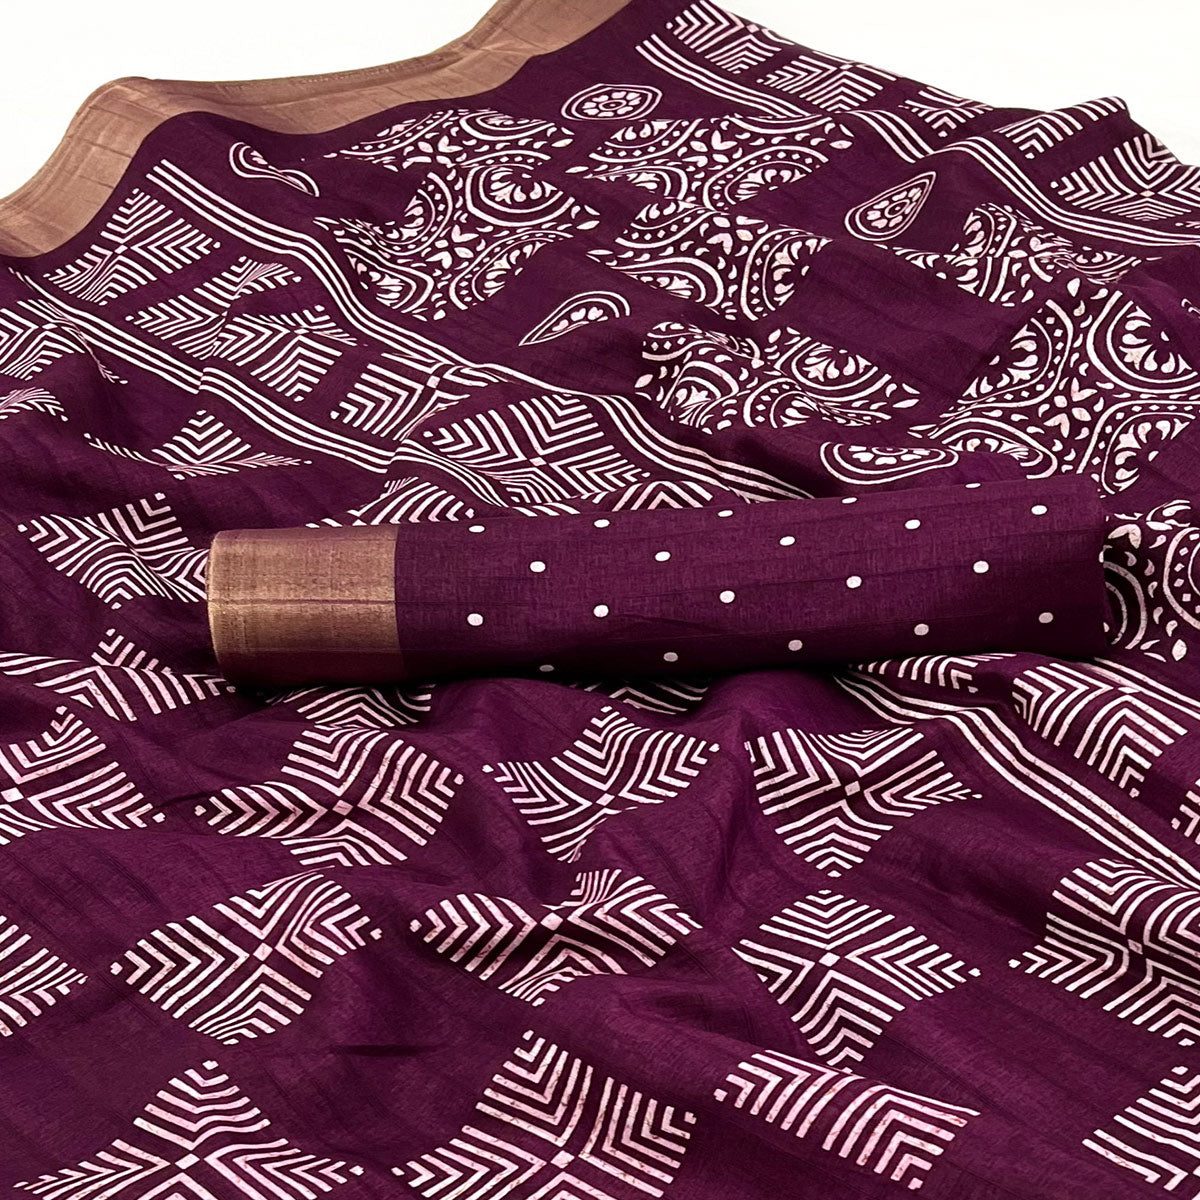 Wine Printed Cotton Blend Saree With Woven Border